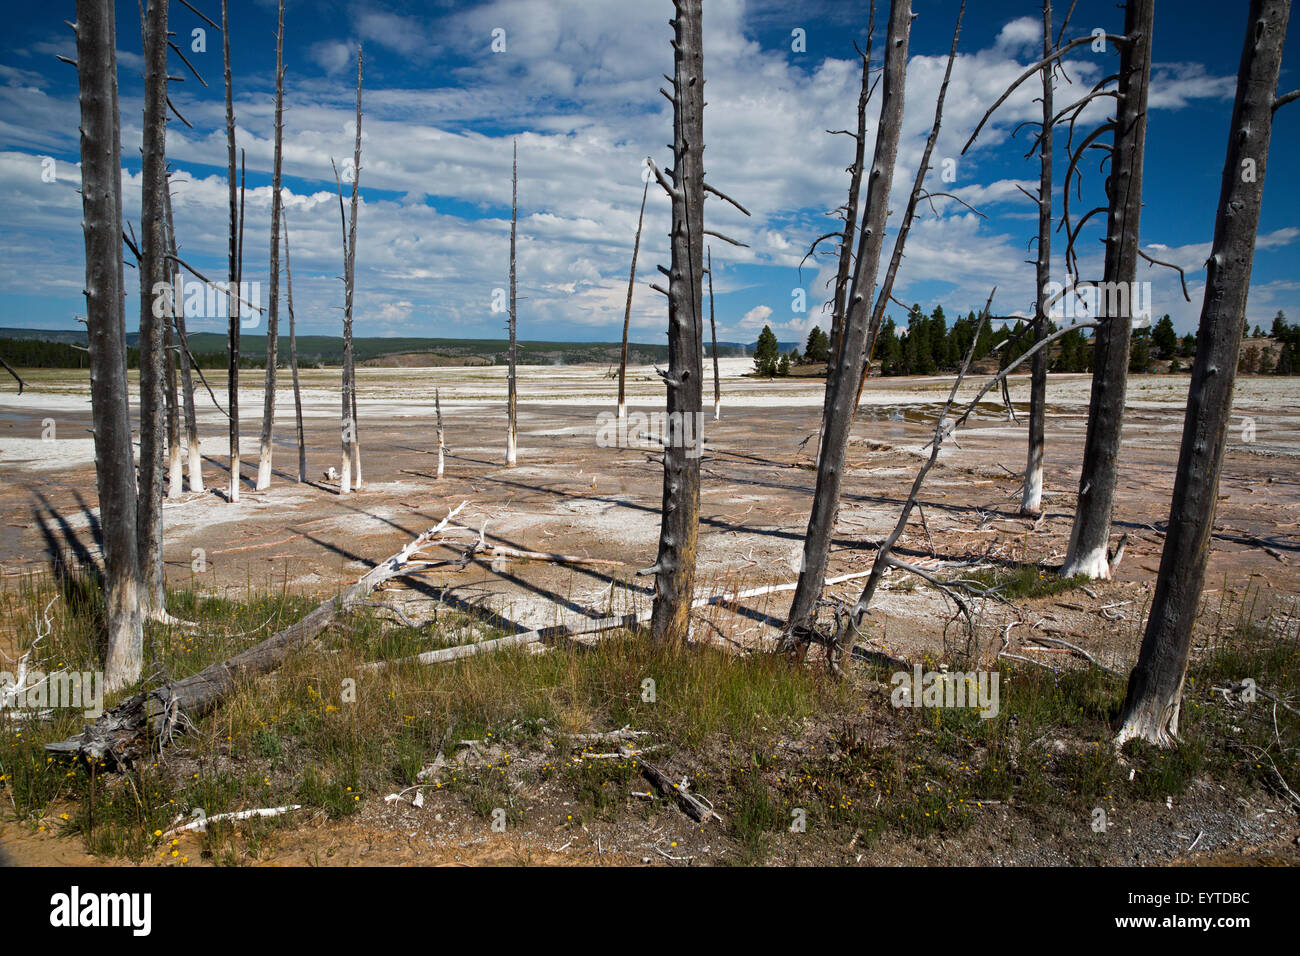 Le Parc National de Yellowstone, Wyoming - arbres morts dans le Lower Yellowstone Geyser Basin. Banque D'Images